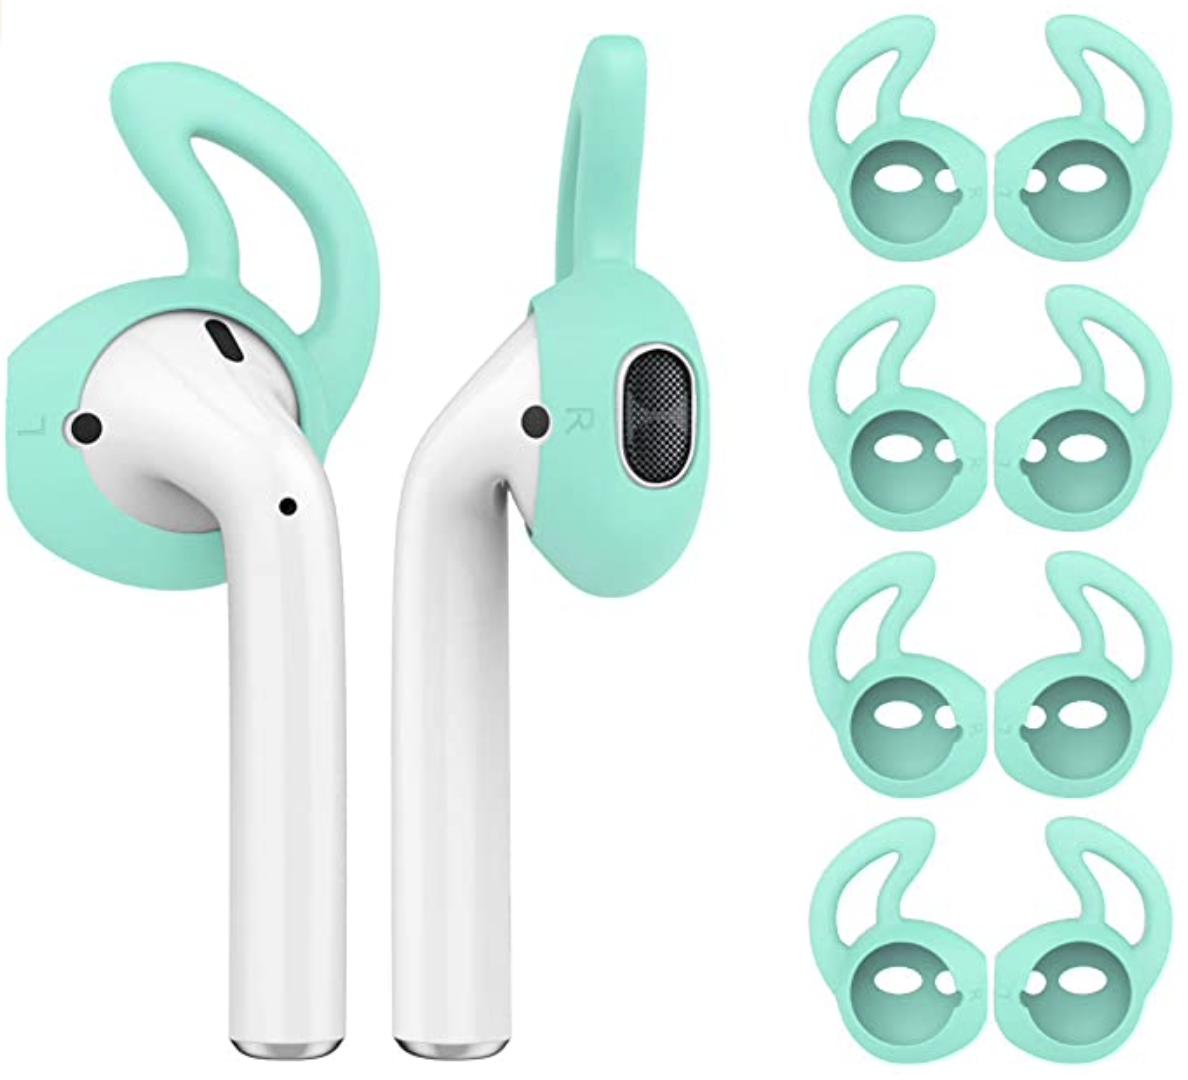 Onecut 5 Pairs Silicone Ear Tips For Airpods Render Cropped